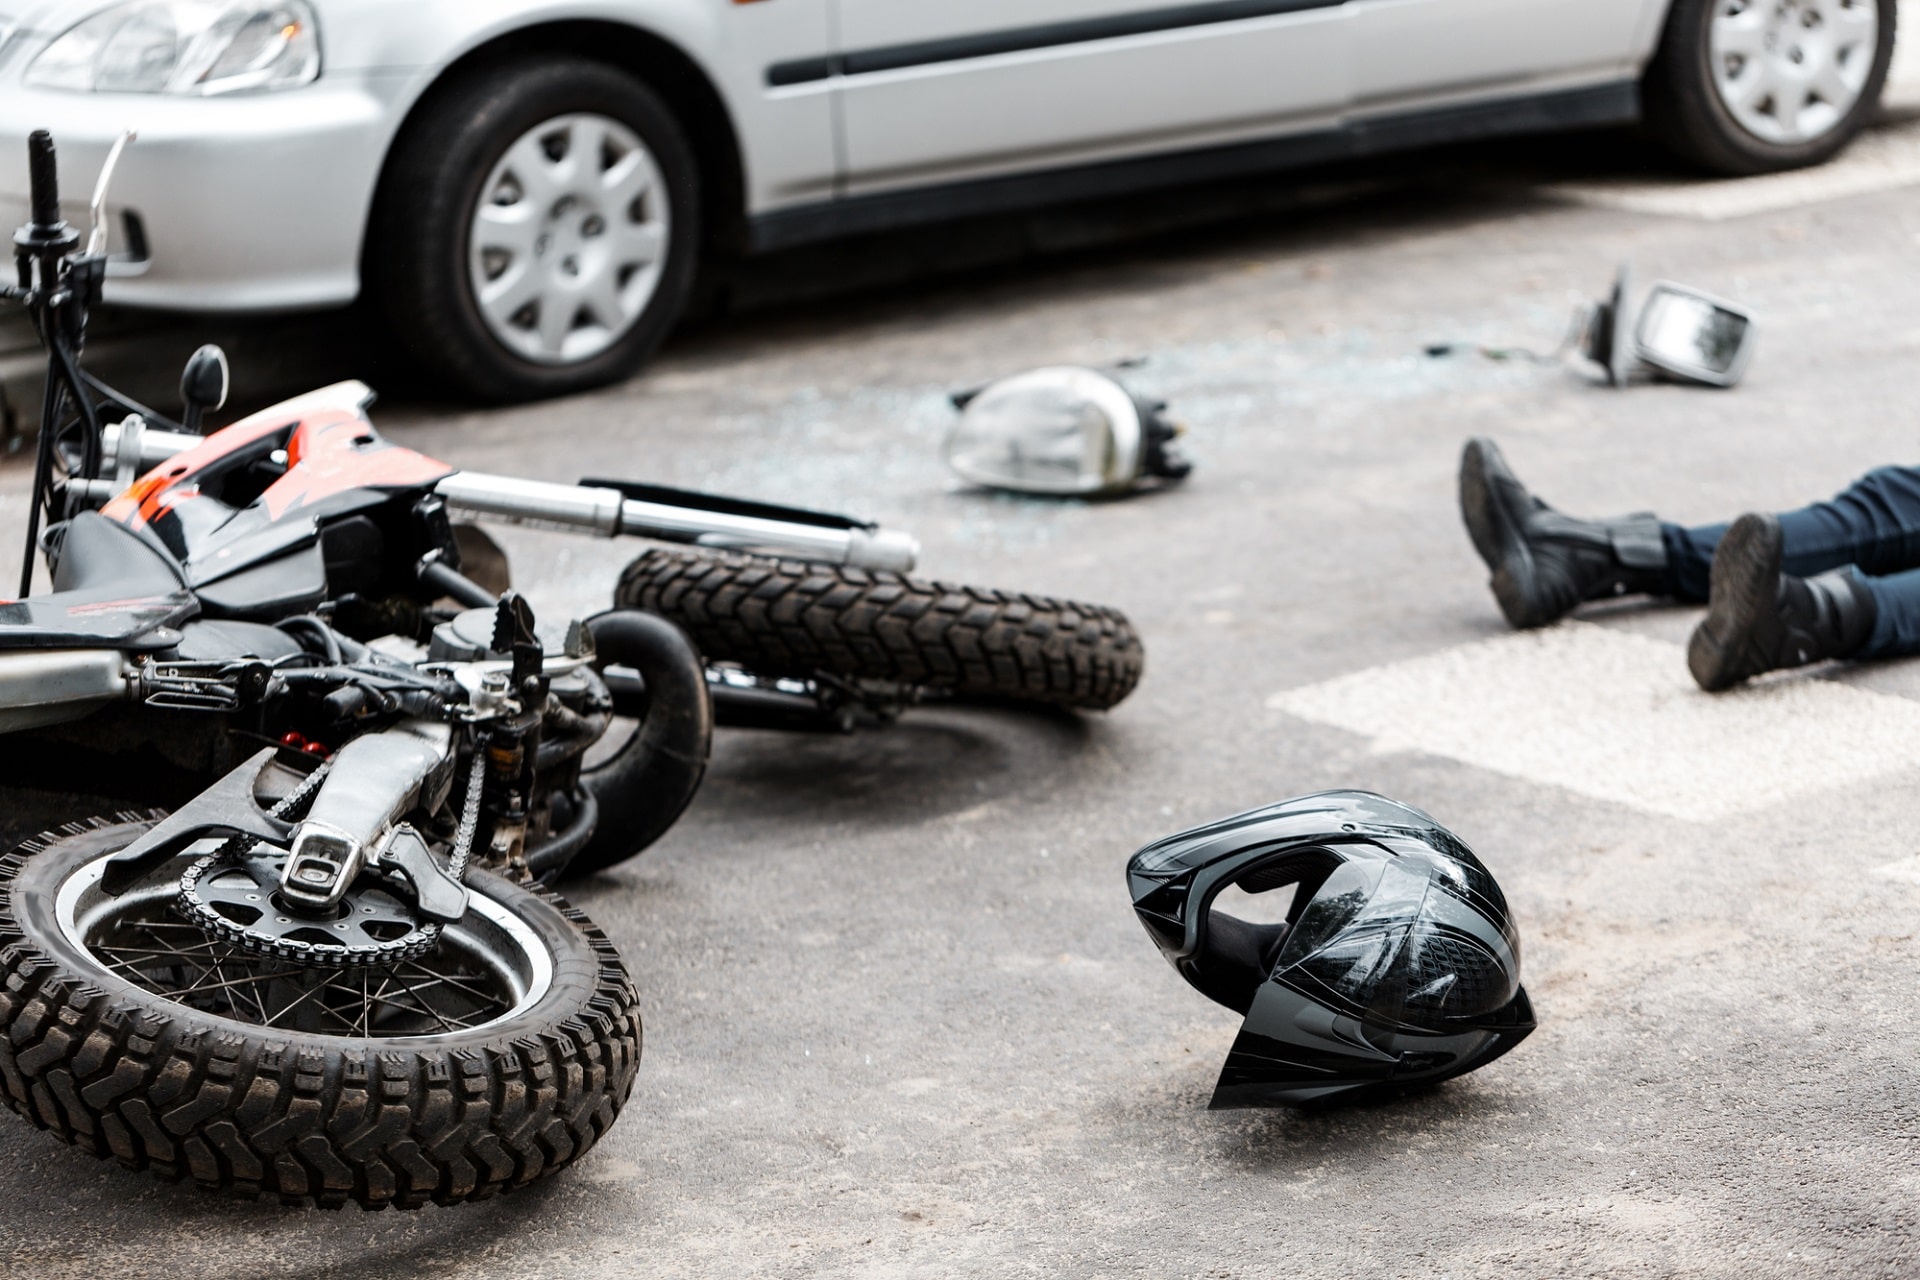 Motorcycle Accident Without a License in Florida. Can You File A Personal Injury Claim?